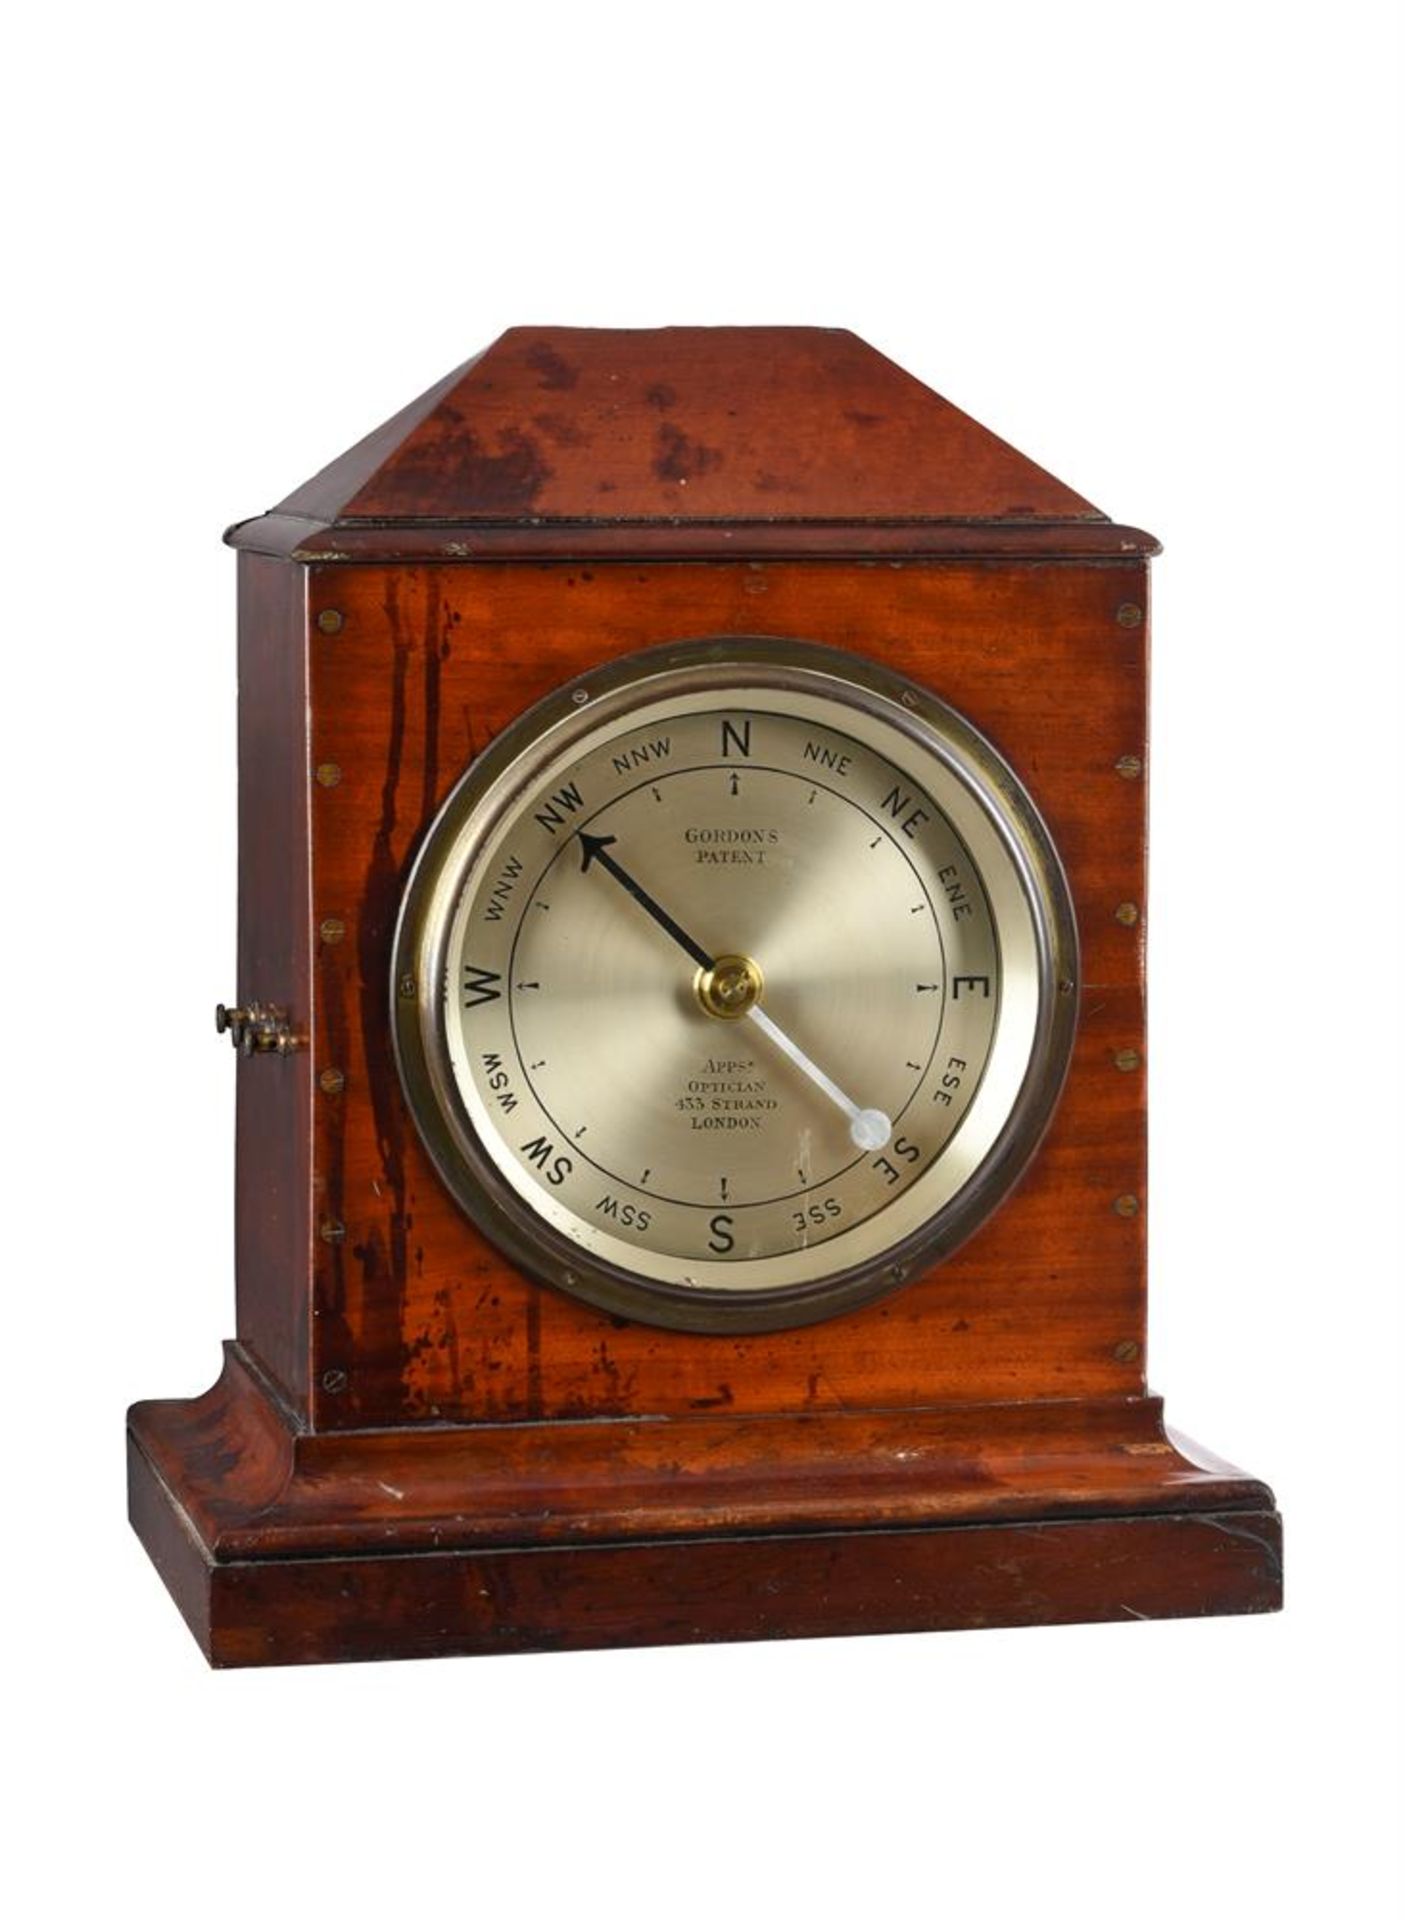 A RARE VICTORIAN MAHOGANY CASED ELECTROMAGNETIC WIND DIRECTION INDICATOR